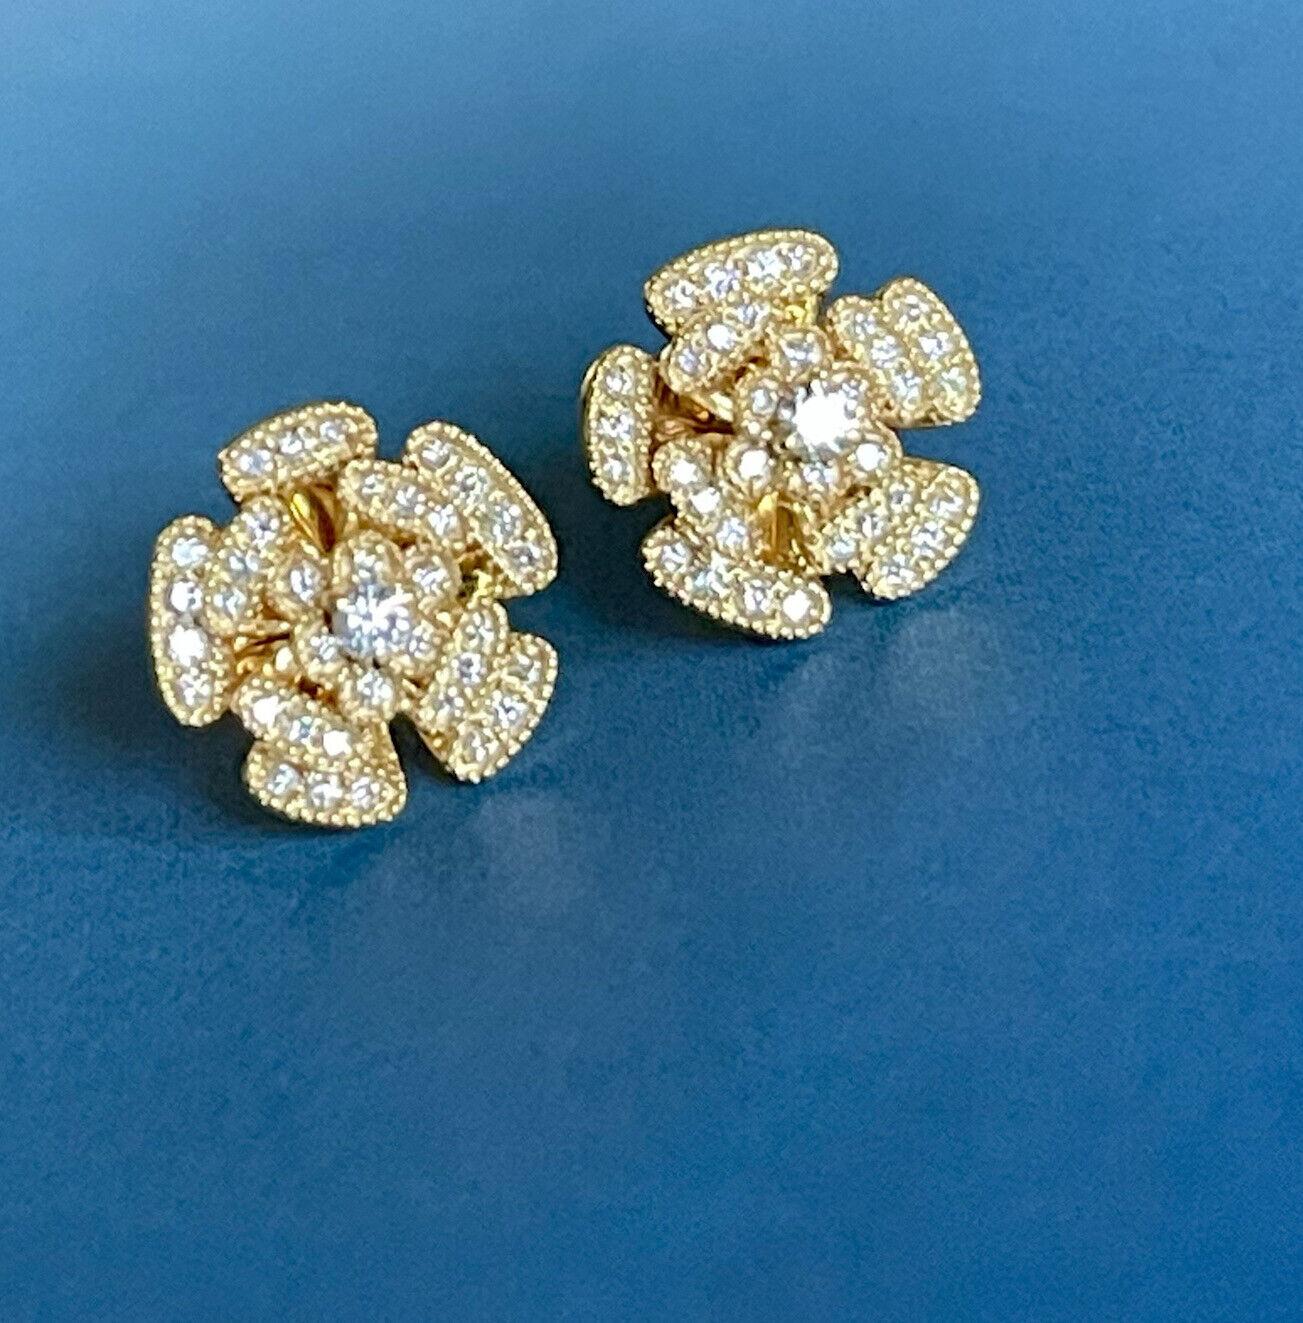 Cervin Blanc 18ct Yellow Gold Diamond Earrings 0.50ct Alpine Rose Studs VS For Sale 1